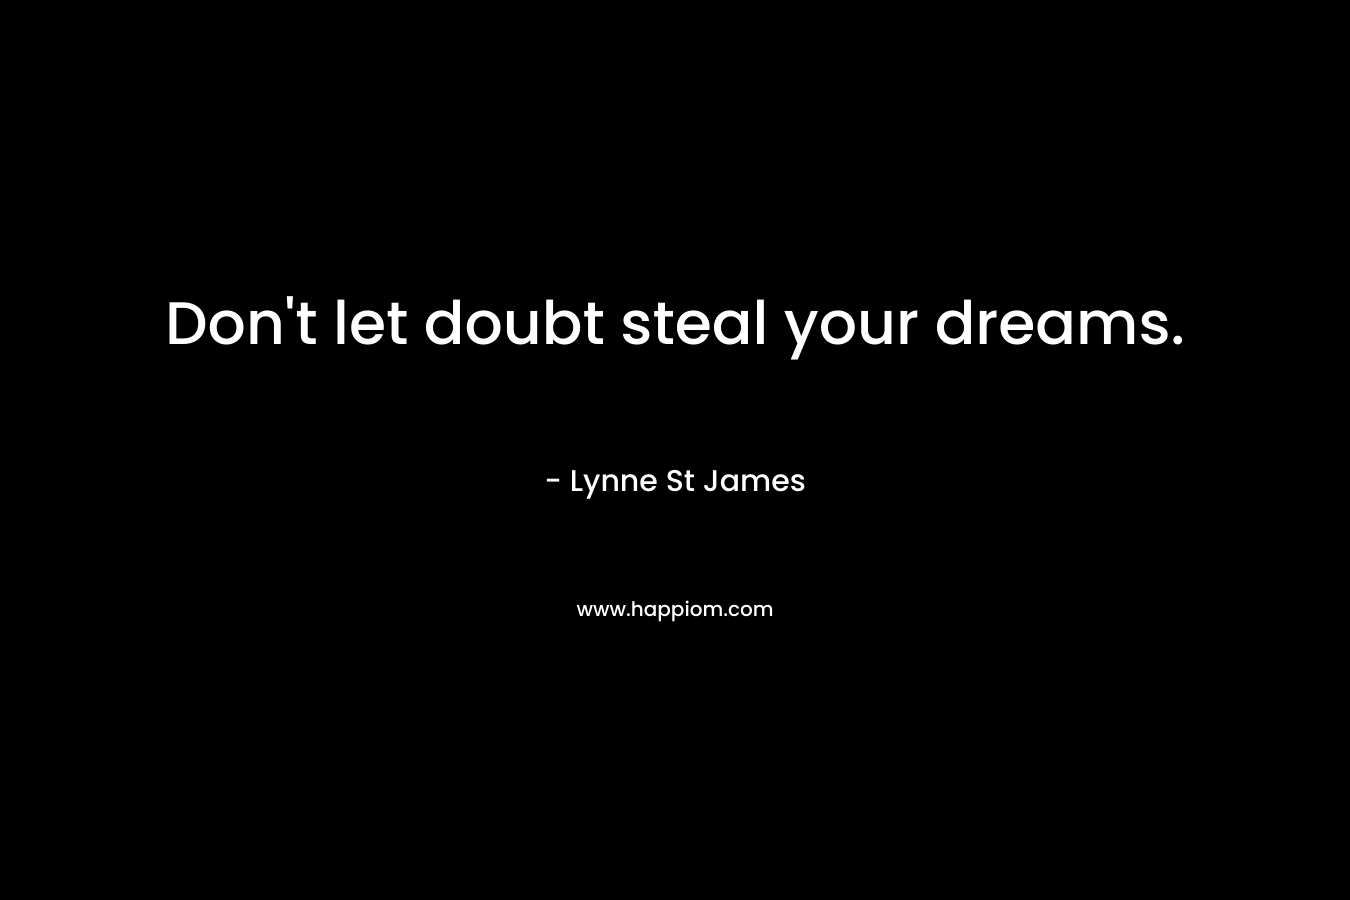 Don't let doubt steal your dreams.